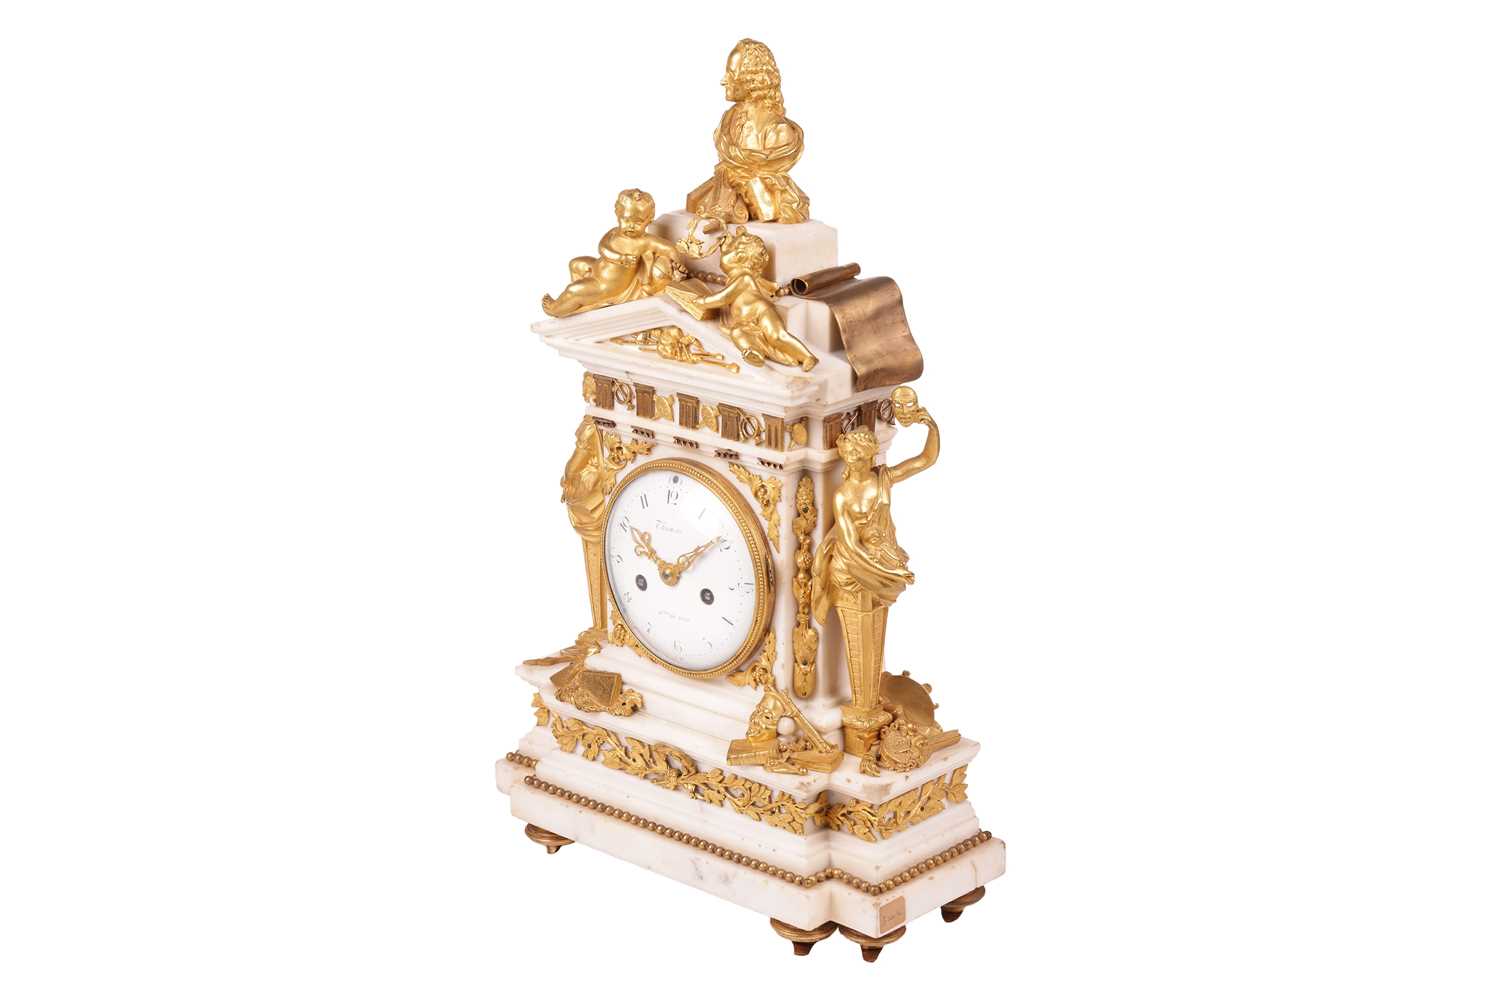 A large and ornate Louis XVI French marble and ormolu-mounted figural mantle clock, of architectural - Image 4 of 23